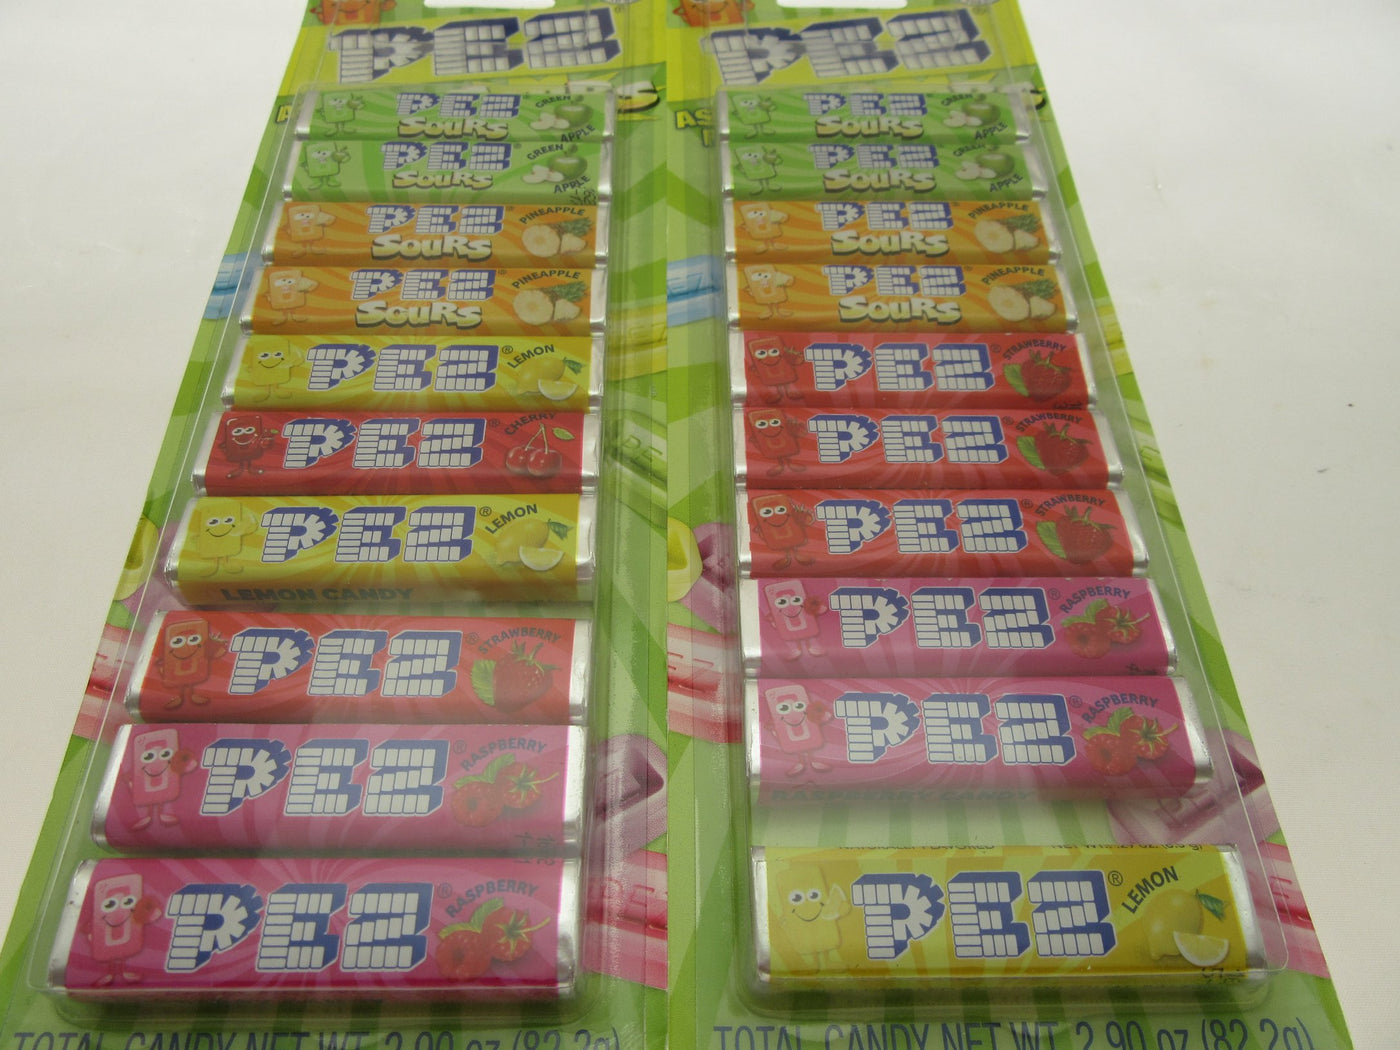 Pez ~ Assorted Fruit And Sours (C) ~ 10 pack 2.9oz ~ Lot of 2